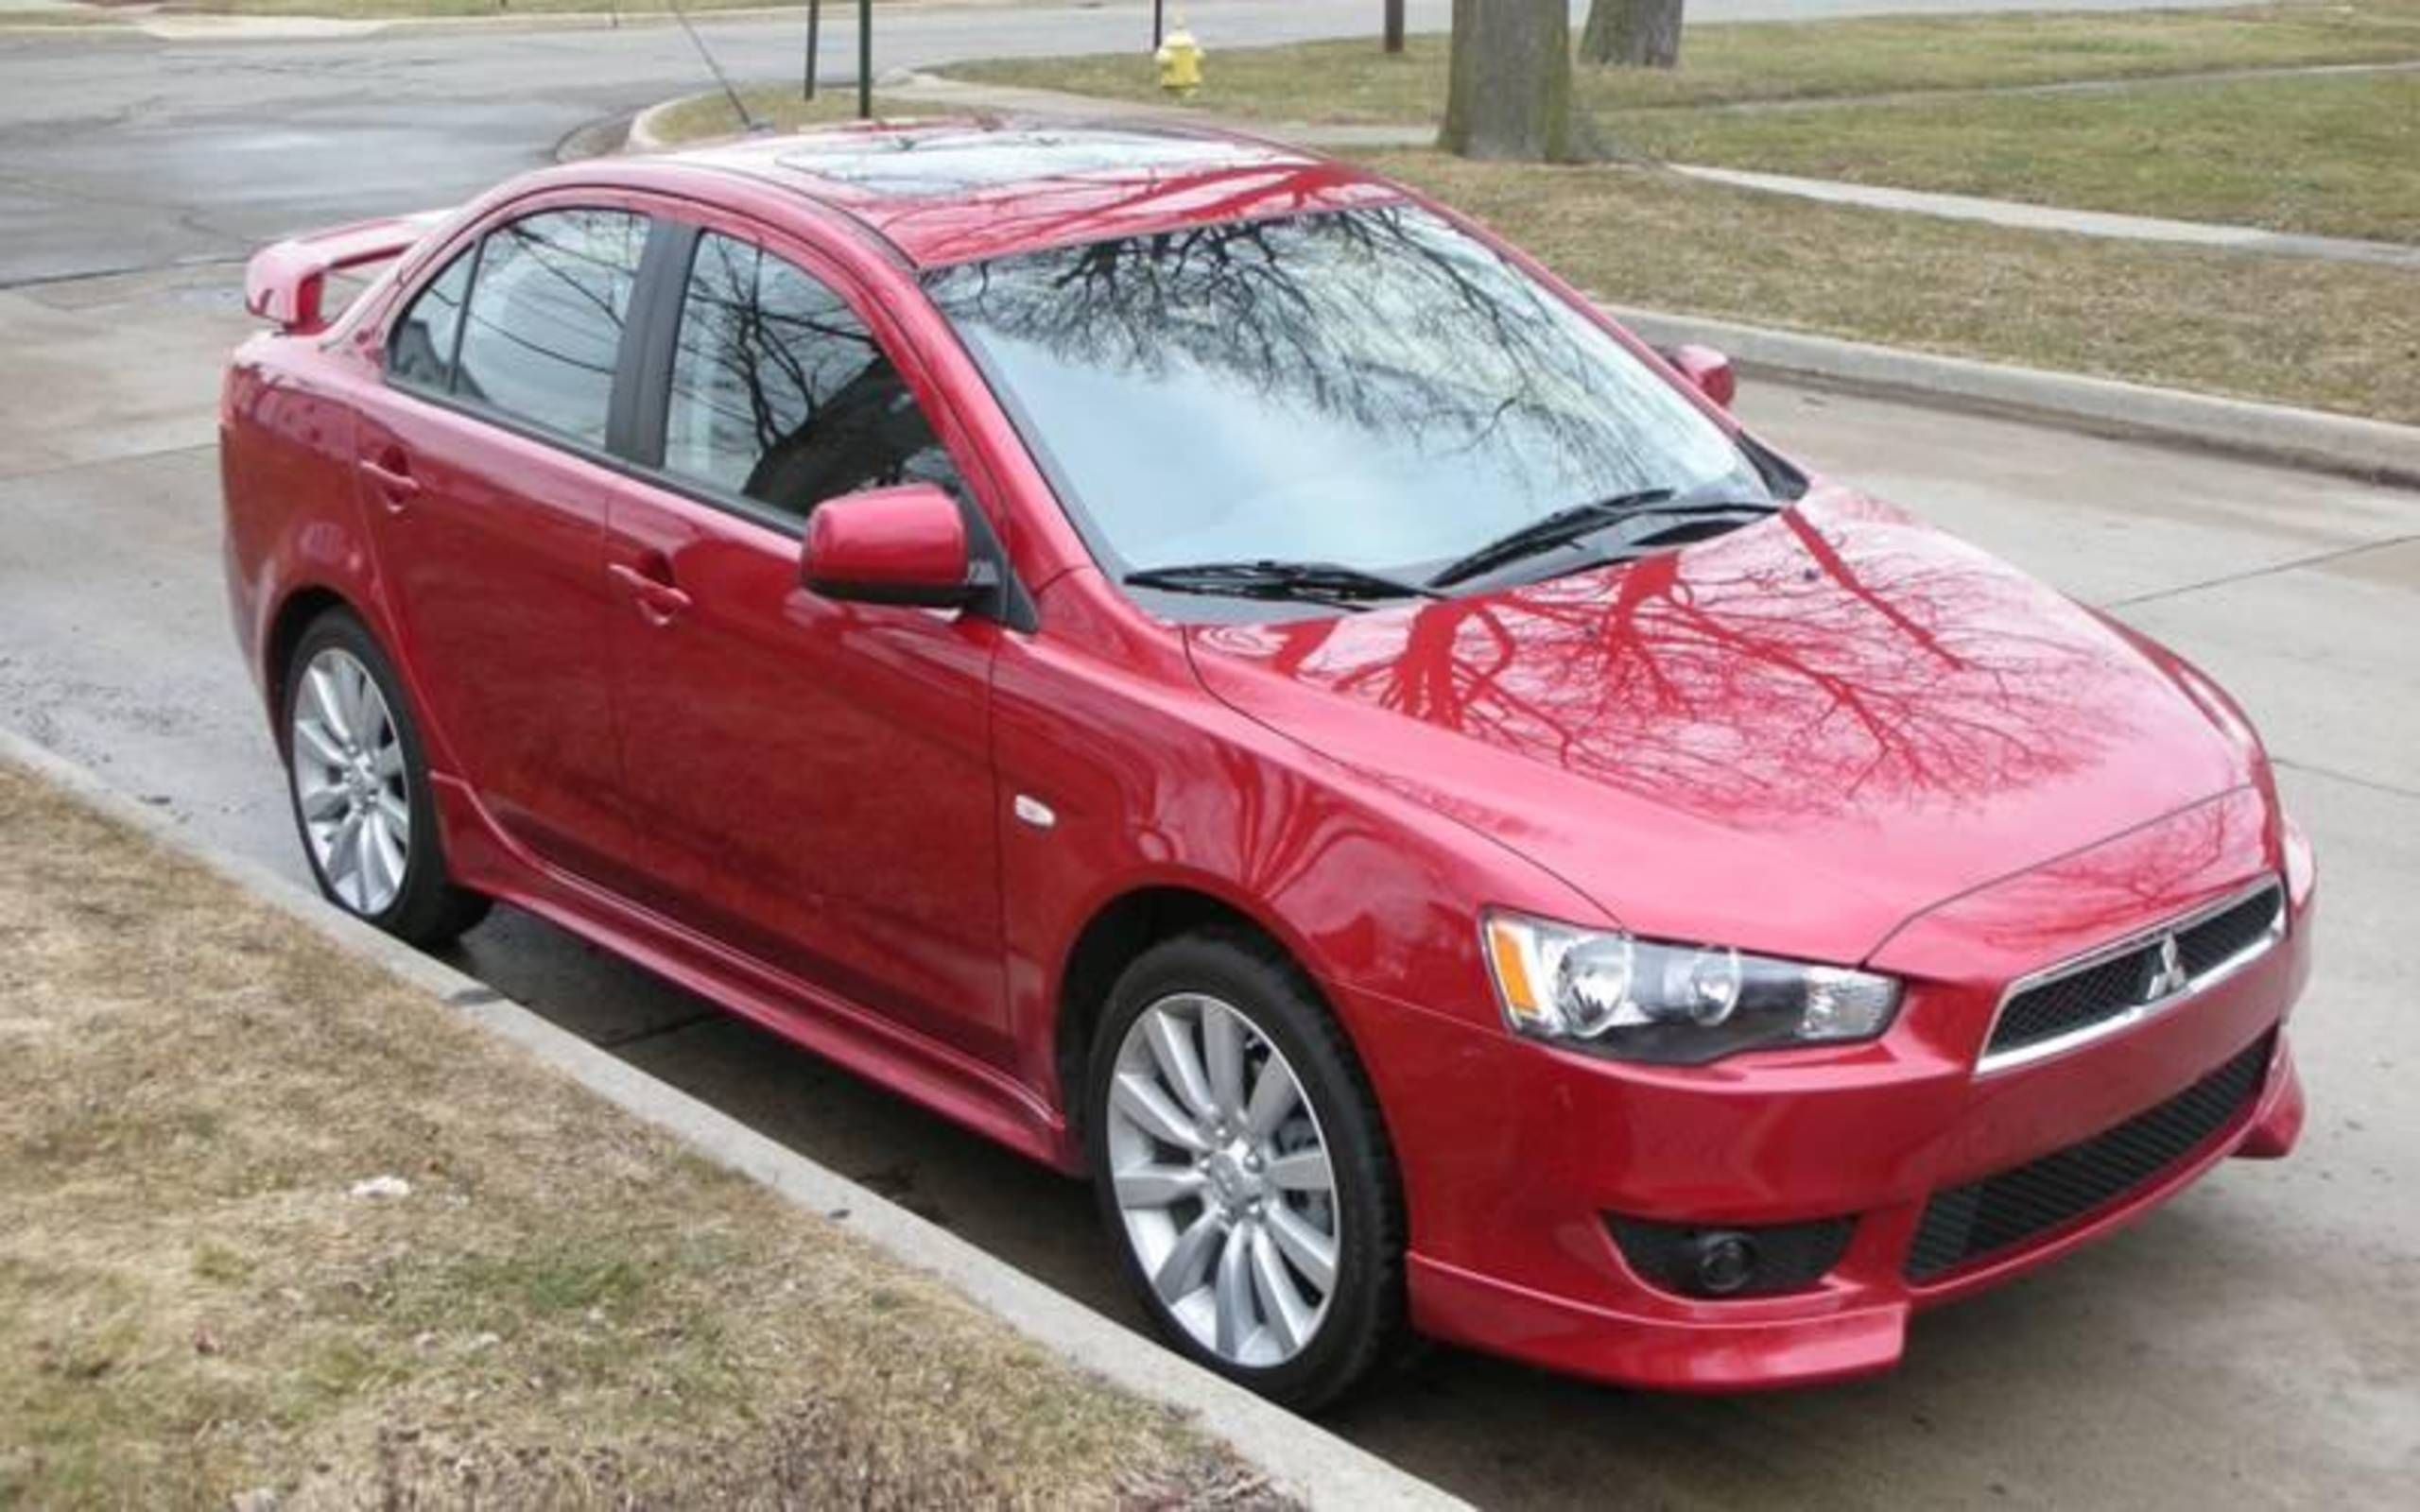 2008 Mitsubishi Lancer GTS: A good base for better things to come